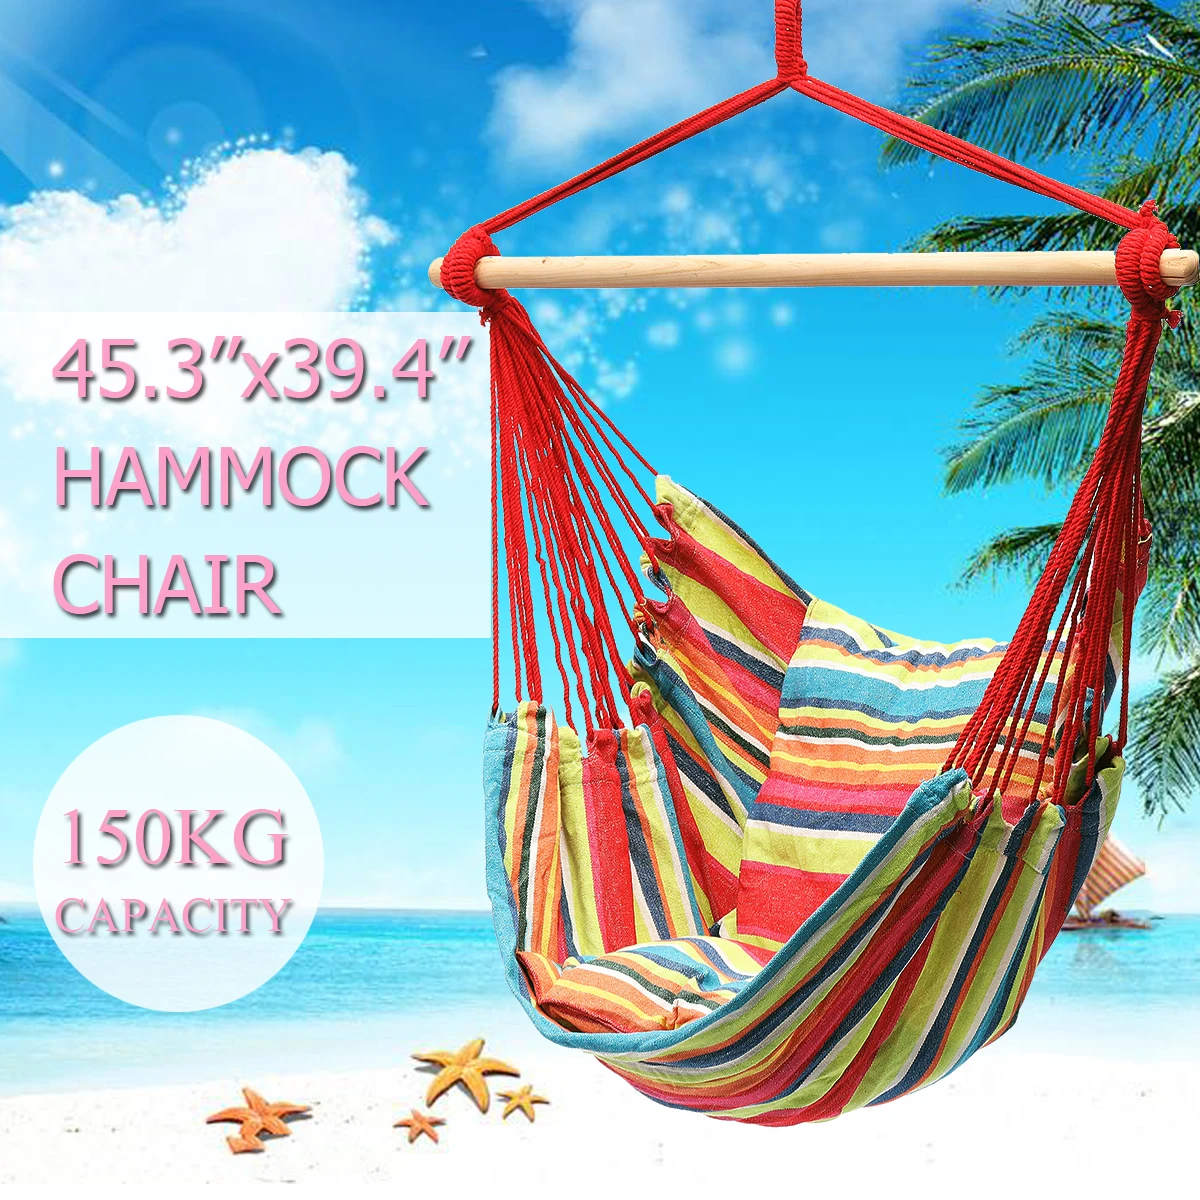 

Safety Hanging Hammocks Chair Indoor Outdoor Furniture Swinging Chair Canvas Dormitory Garden Swing + 2 Pillows Hammock Camping